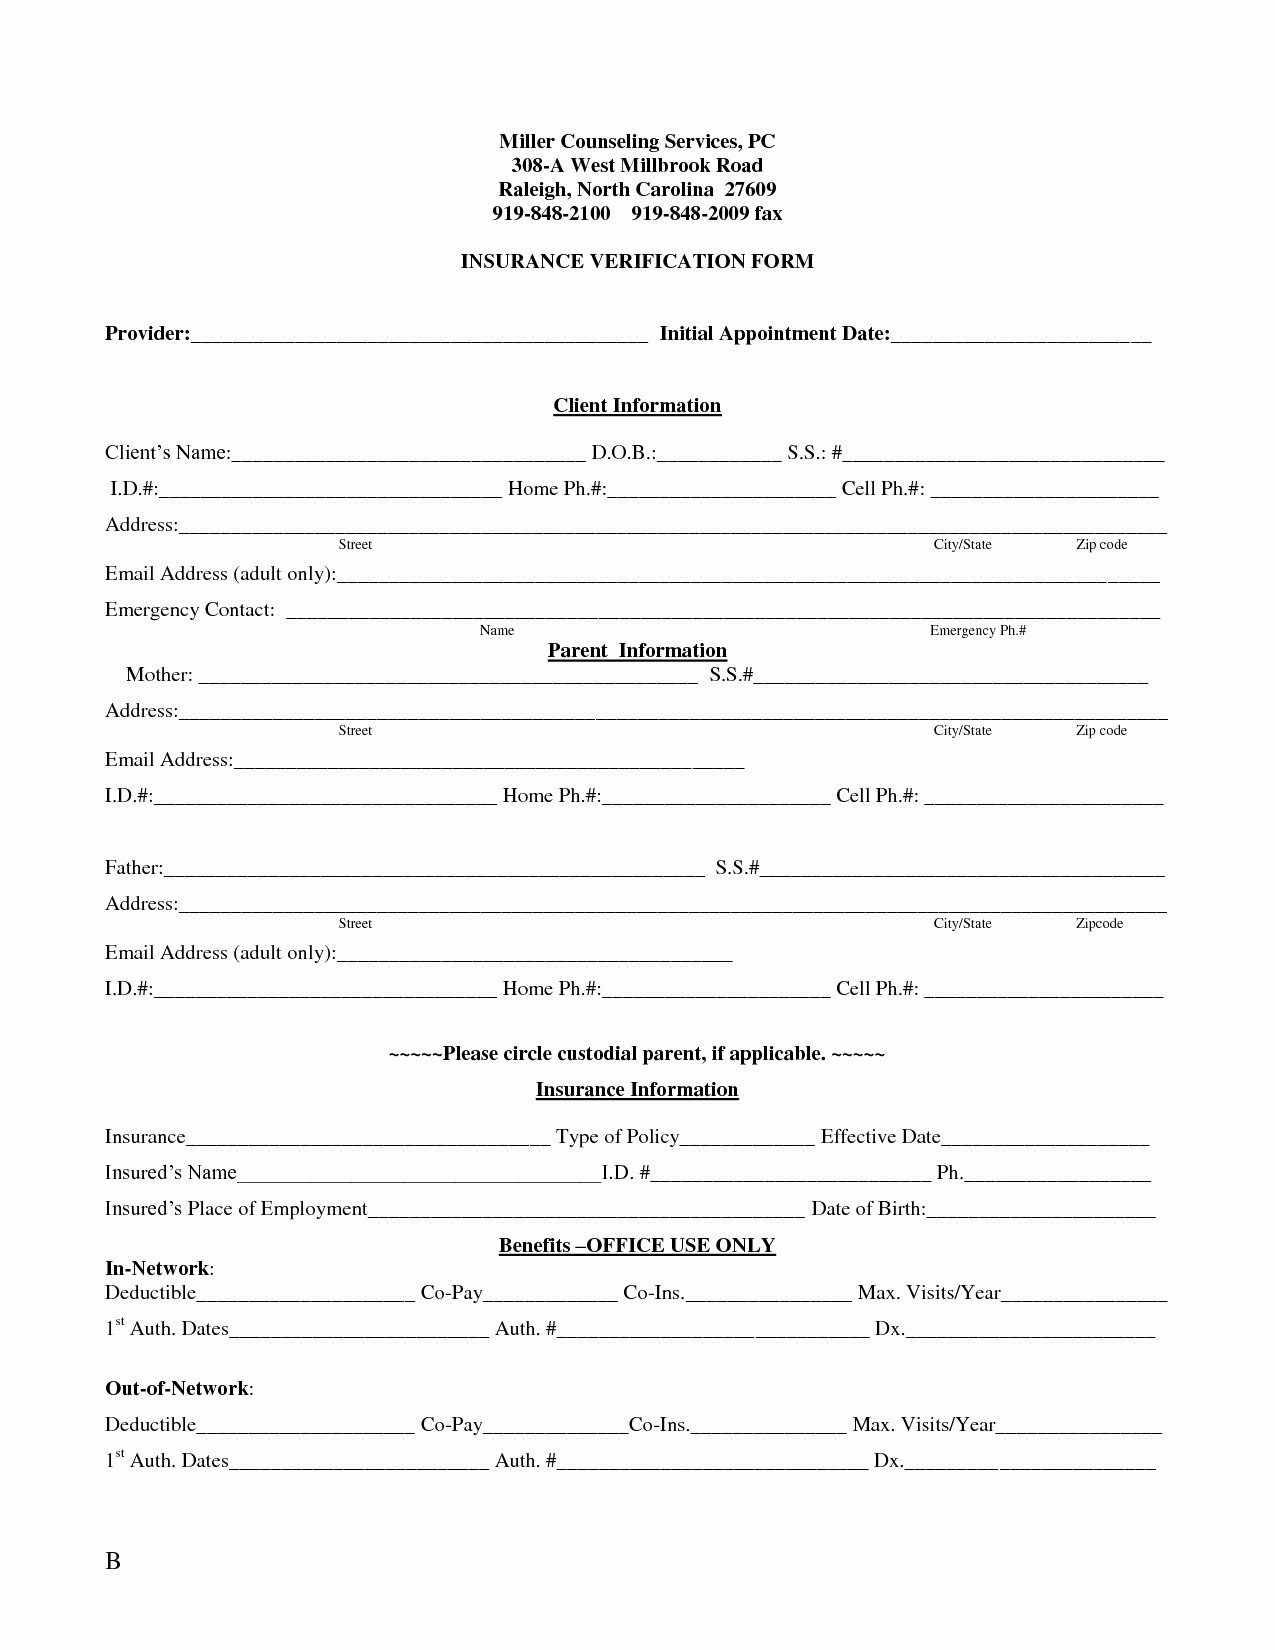 Insurance Verification Form Templates Template New Awful Dental